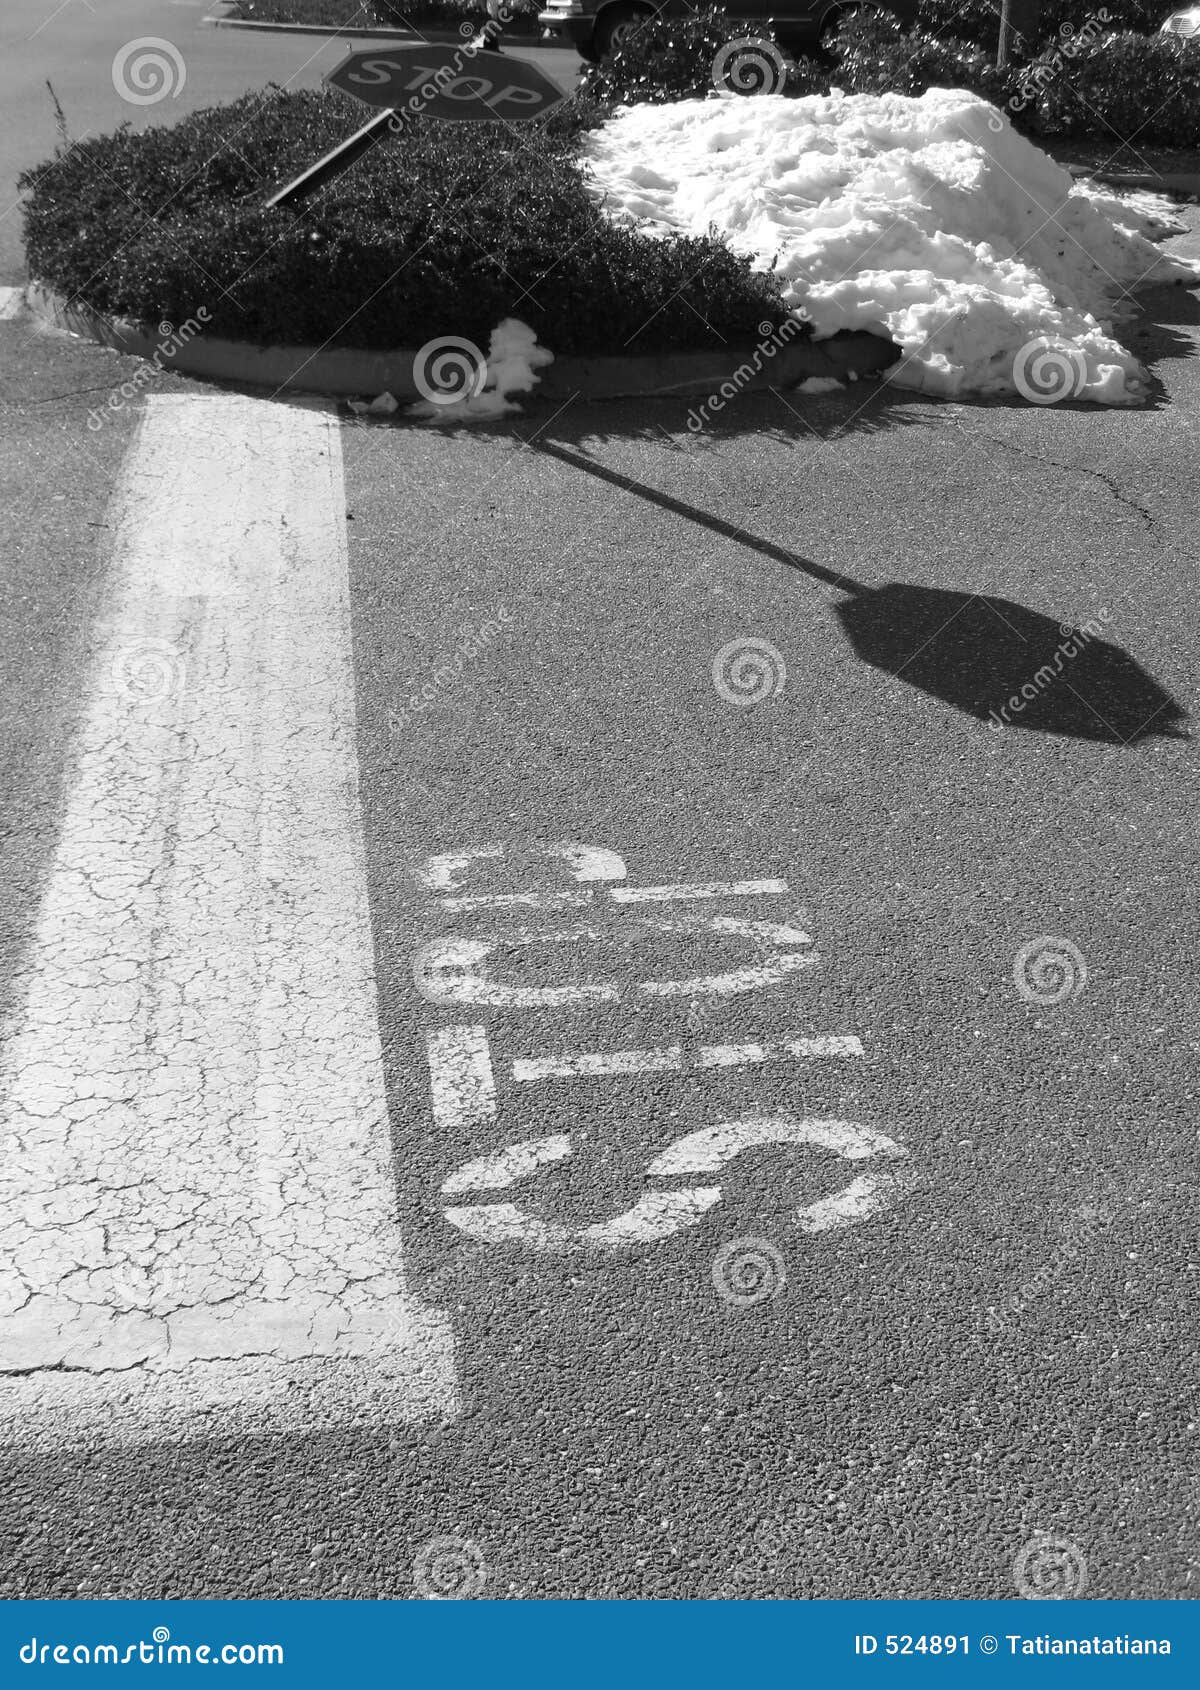 Stop Sign_black And White Stock Image - Image: 524891